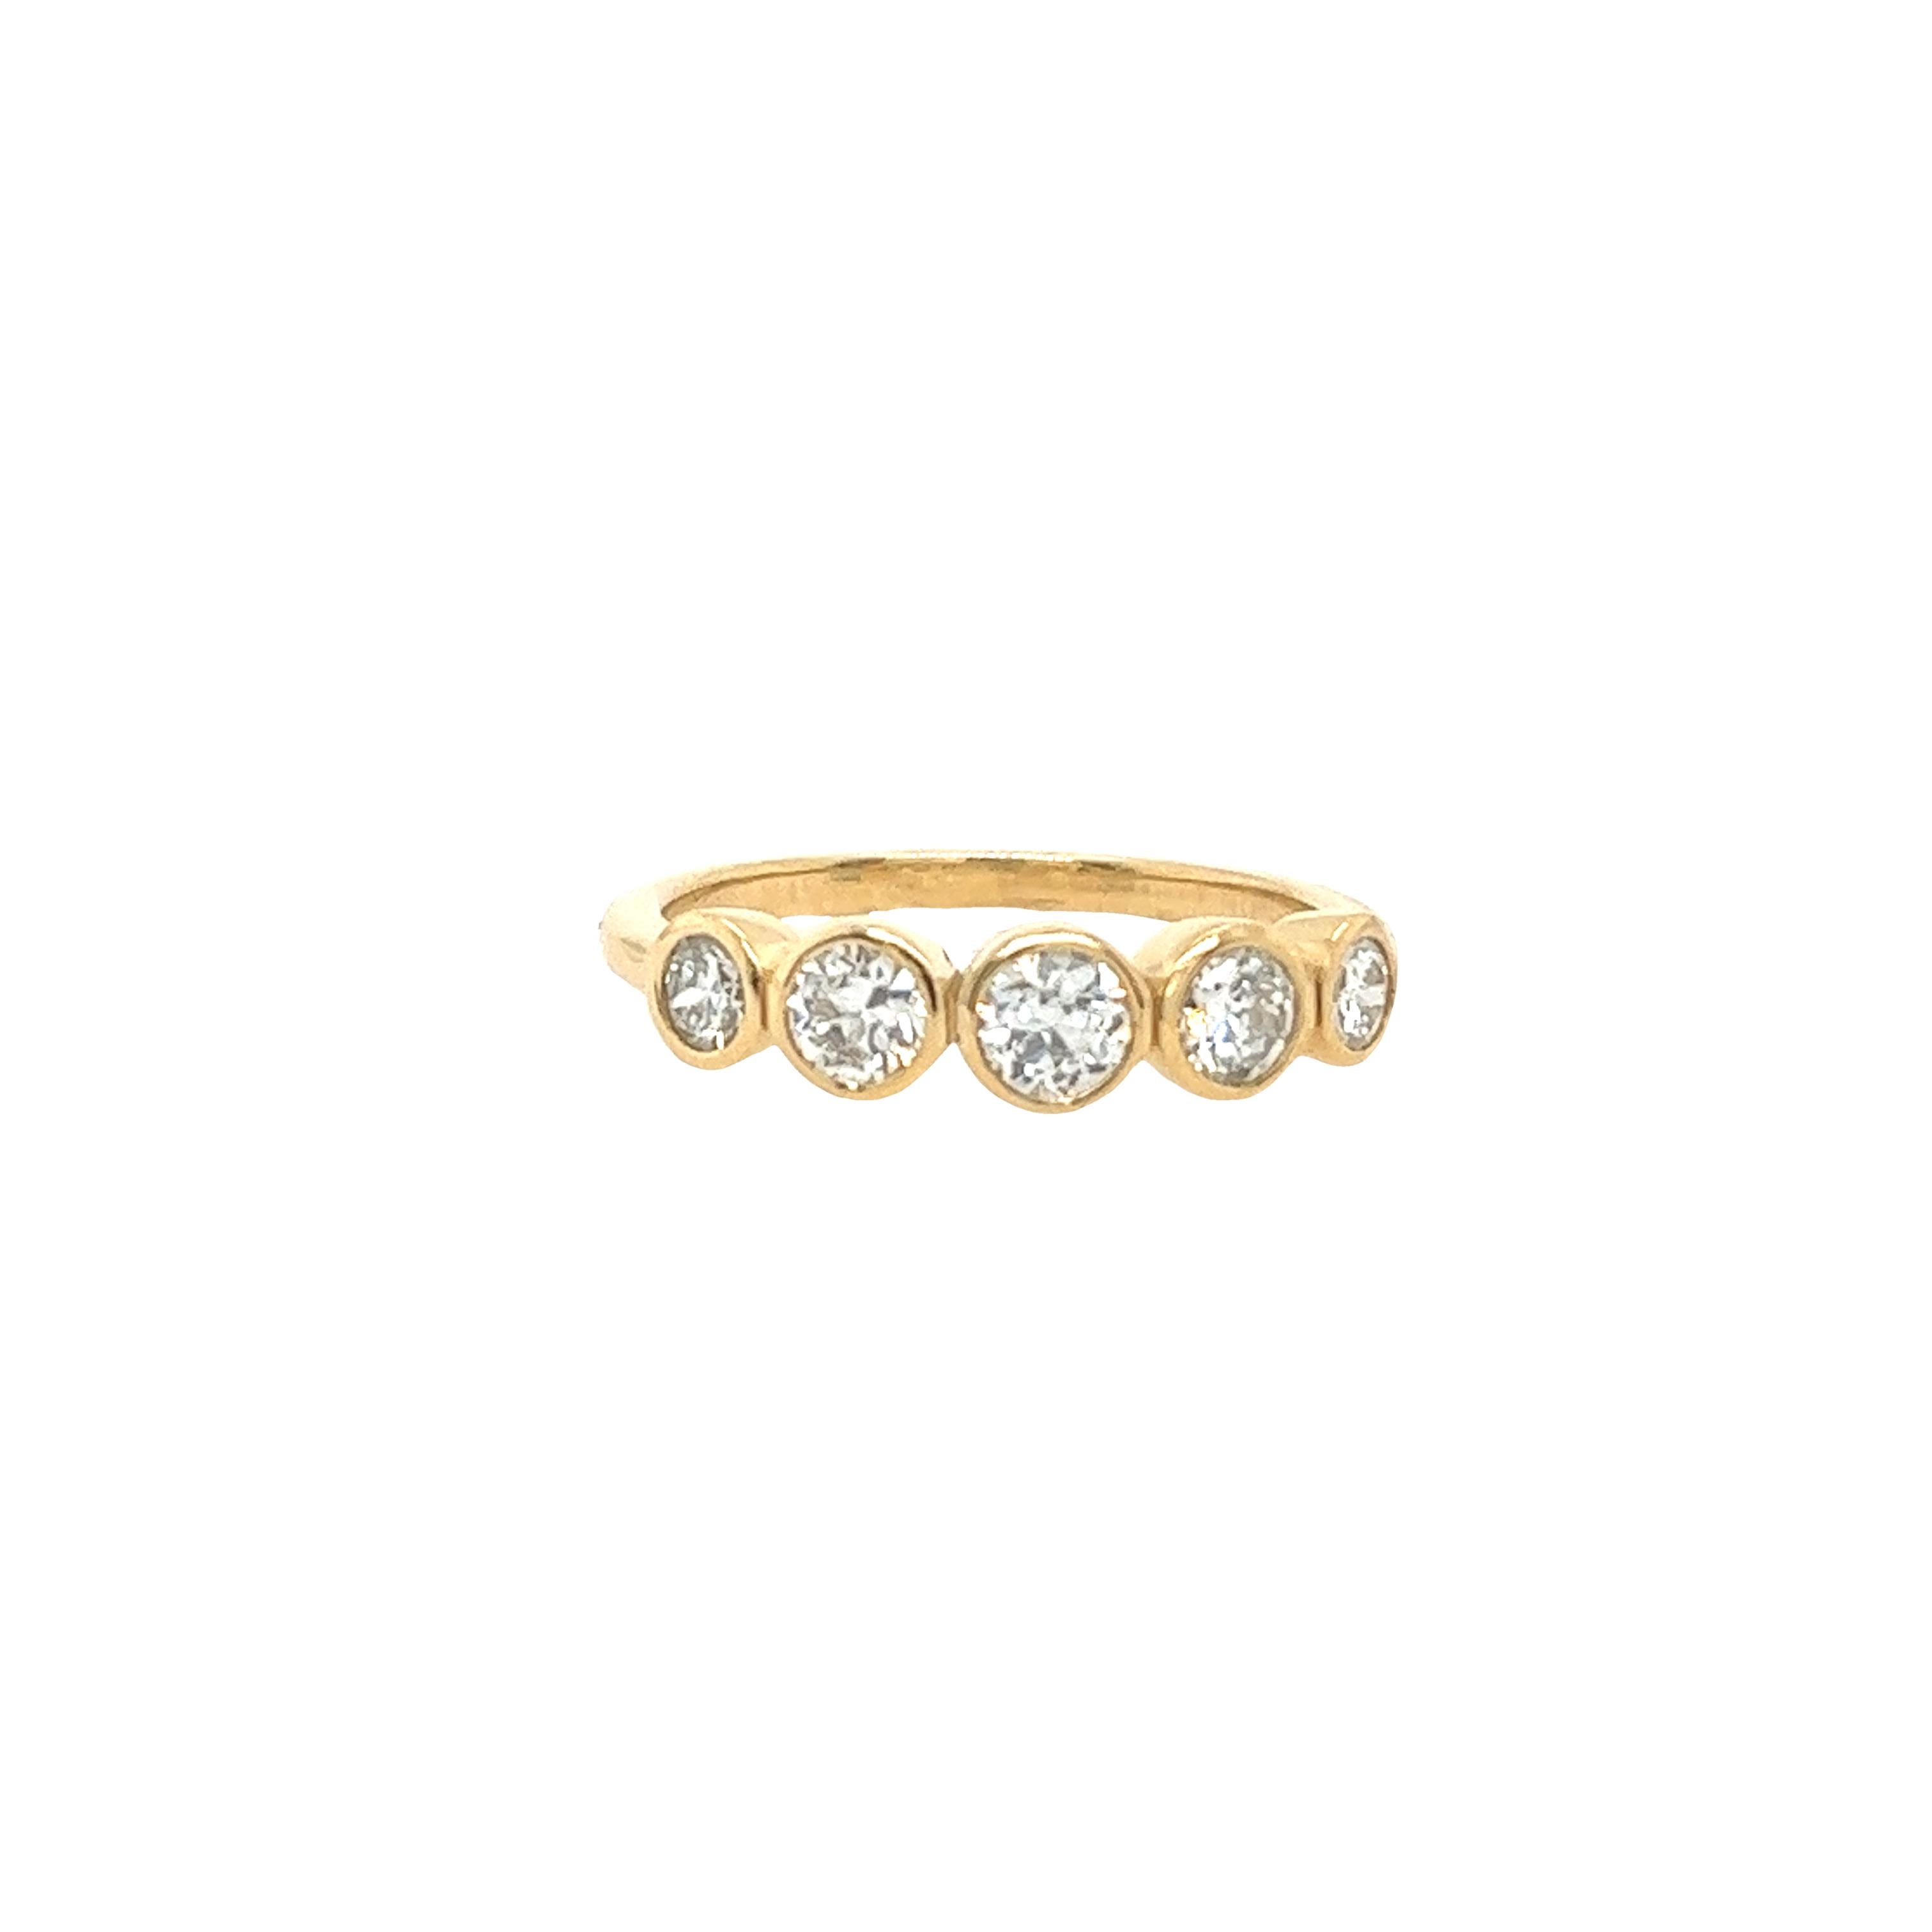 5-Stone Diamond Ring Set With 0.70ct H/SI1 Round Brilliant Diamonds In 18ct Gold For Sale 1